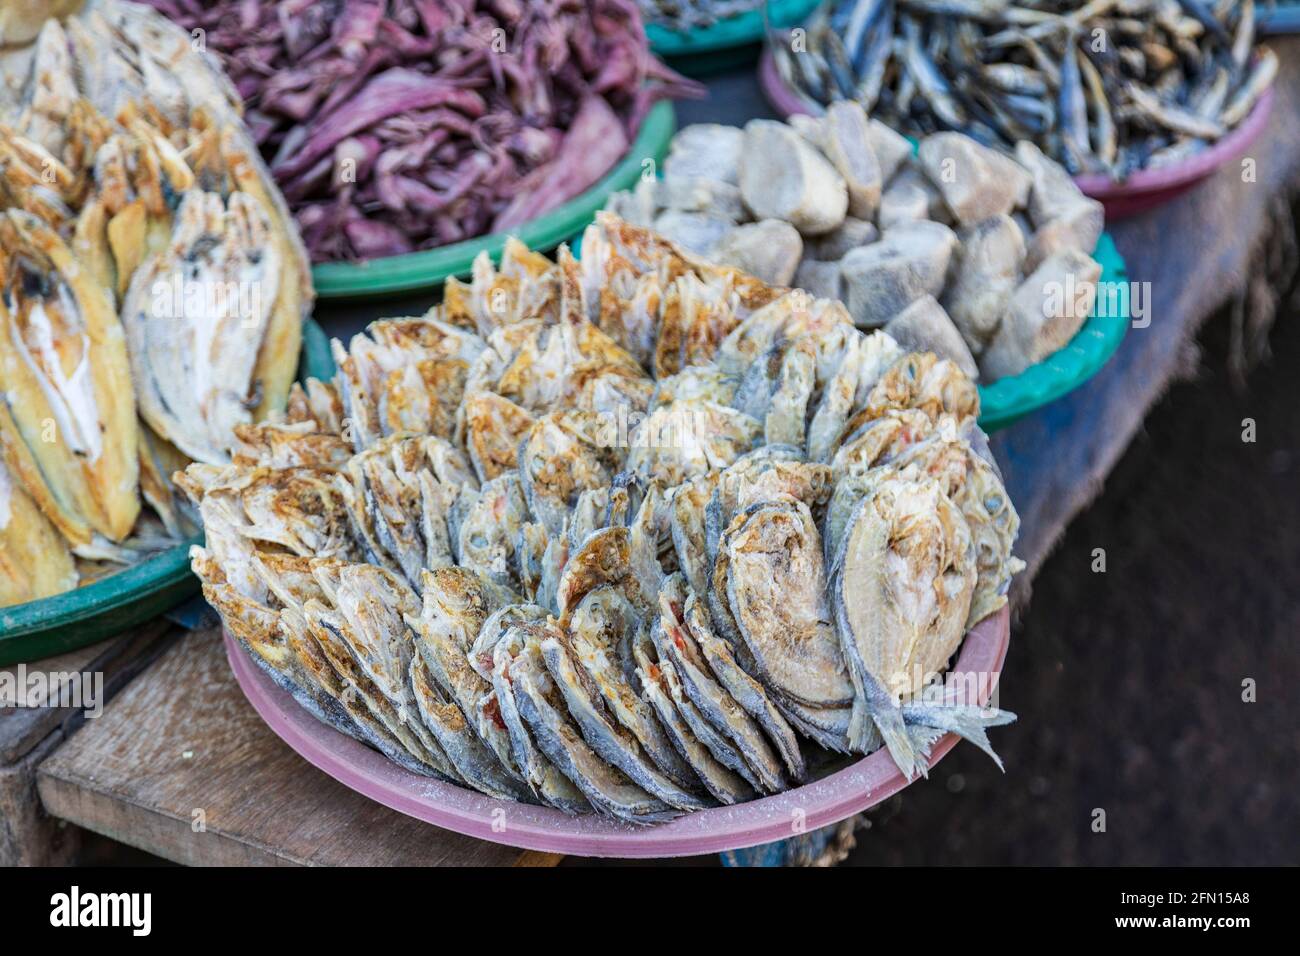 Dried and salted fish on sale at the farmer's market in Banyuwangi or Banjuwangi, Java, Indonesia, Southeast Asia, Asia Stock Photo